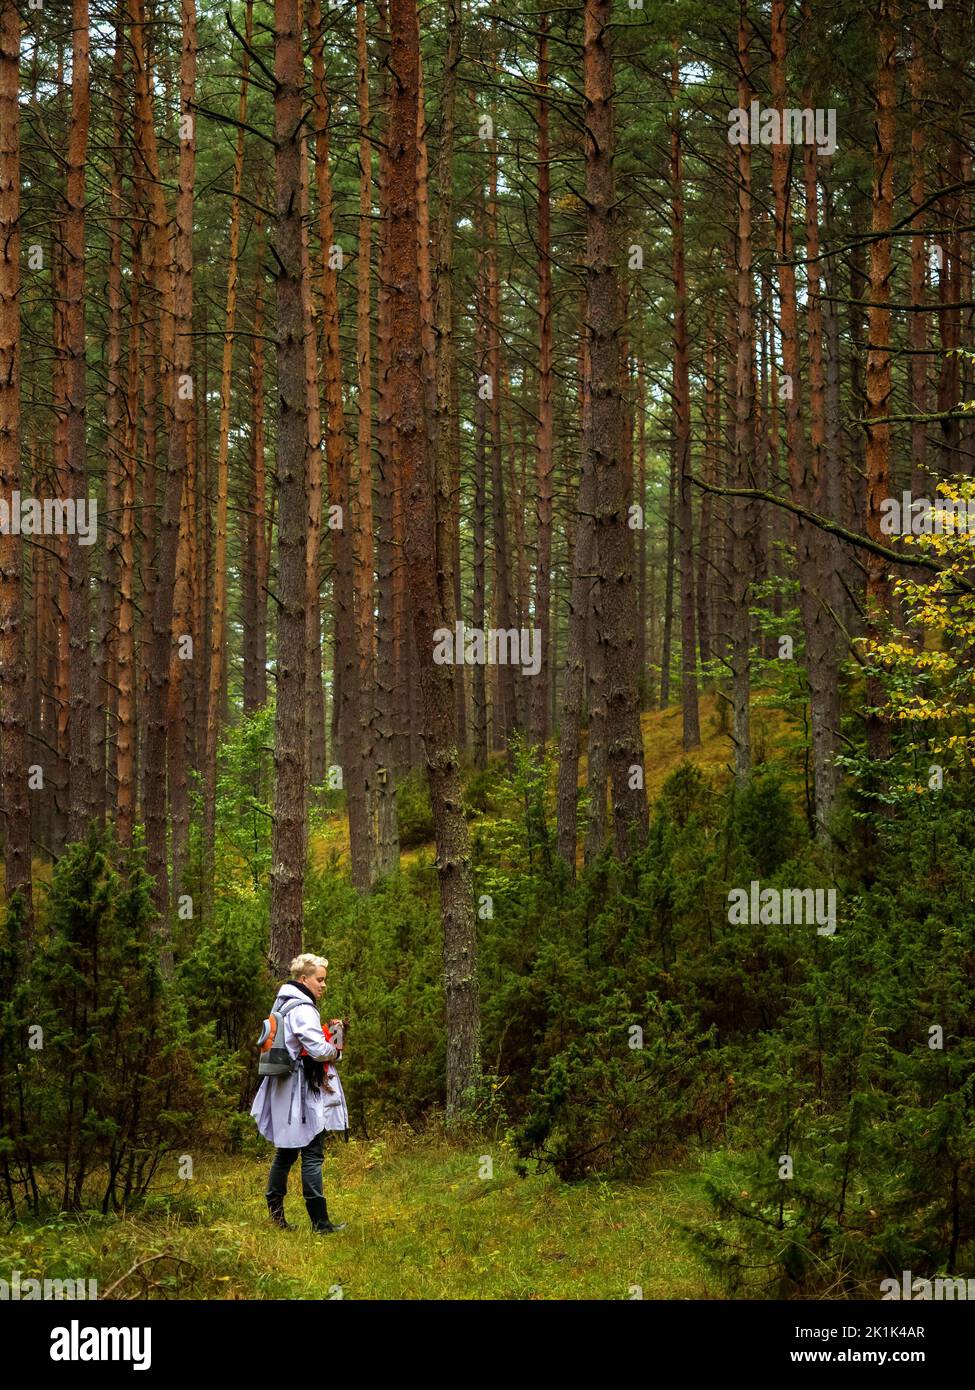 alone person standing in a deep pine forest and holding his pet dog yorkshire terrier Stock Photo